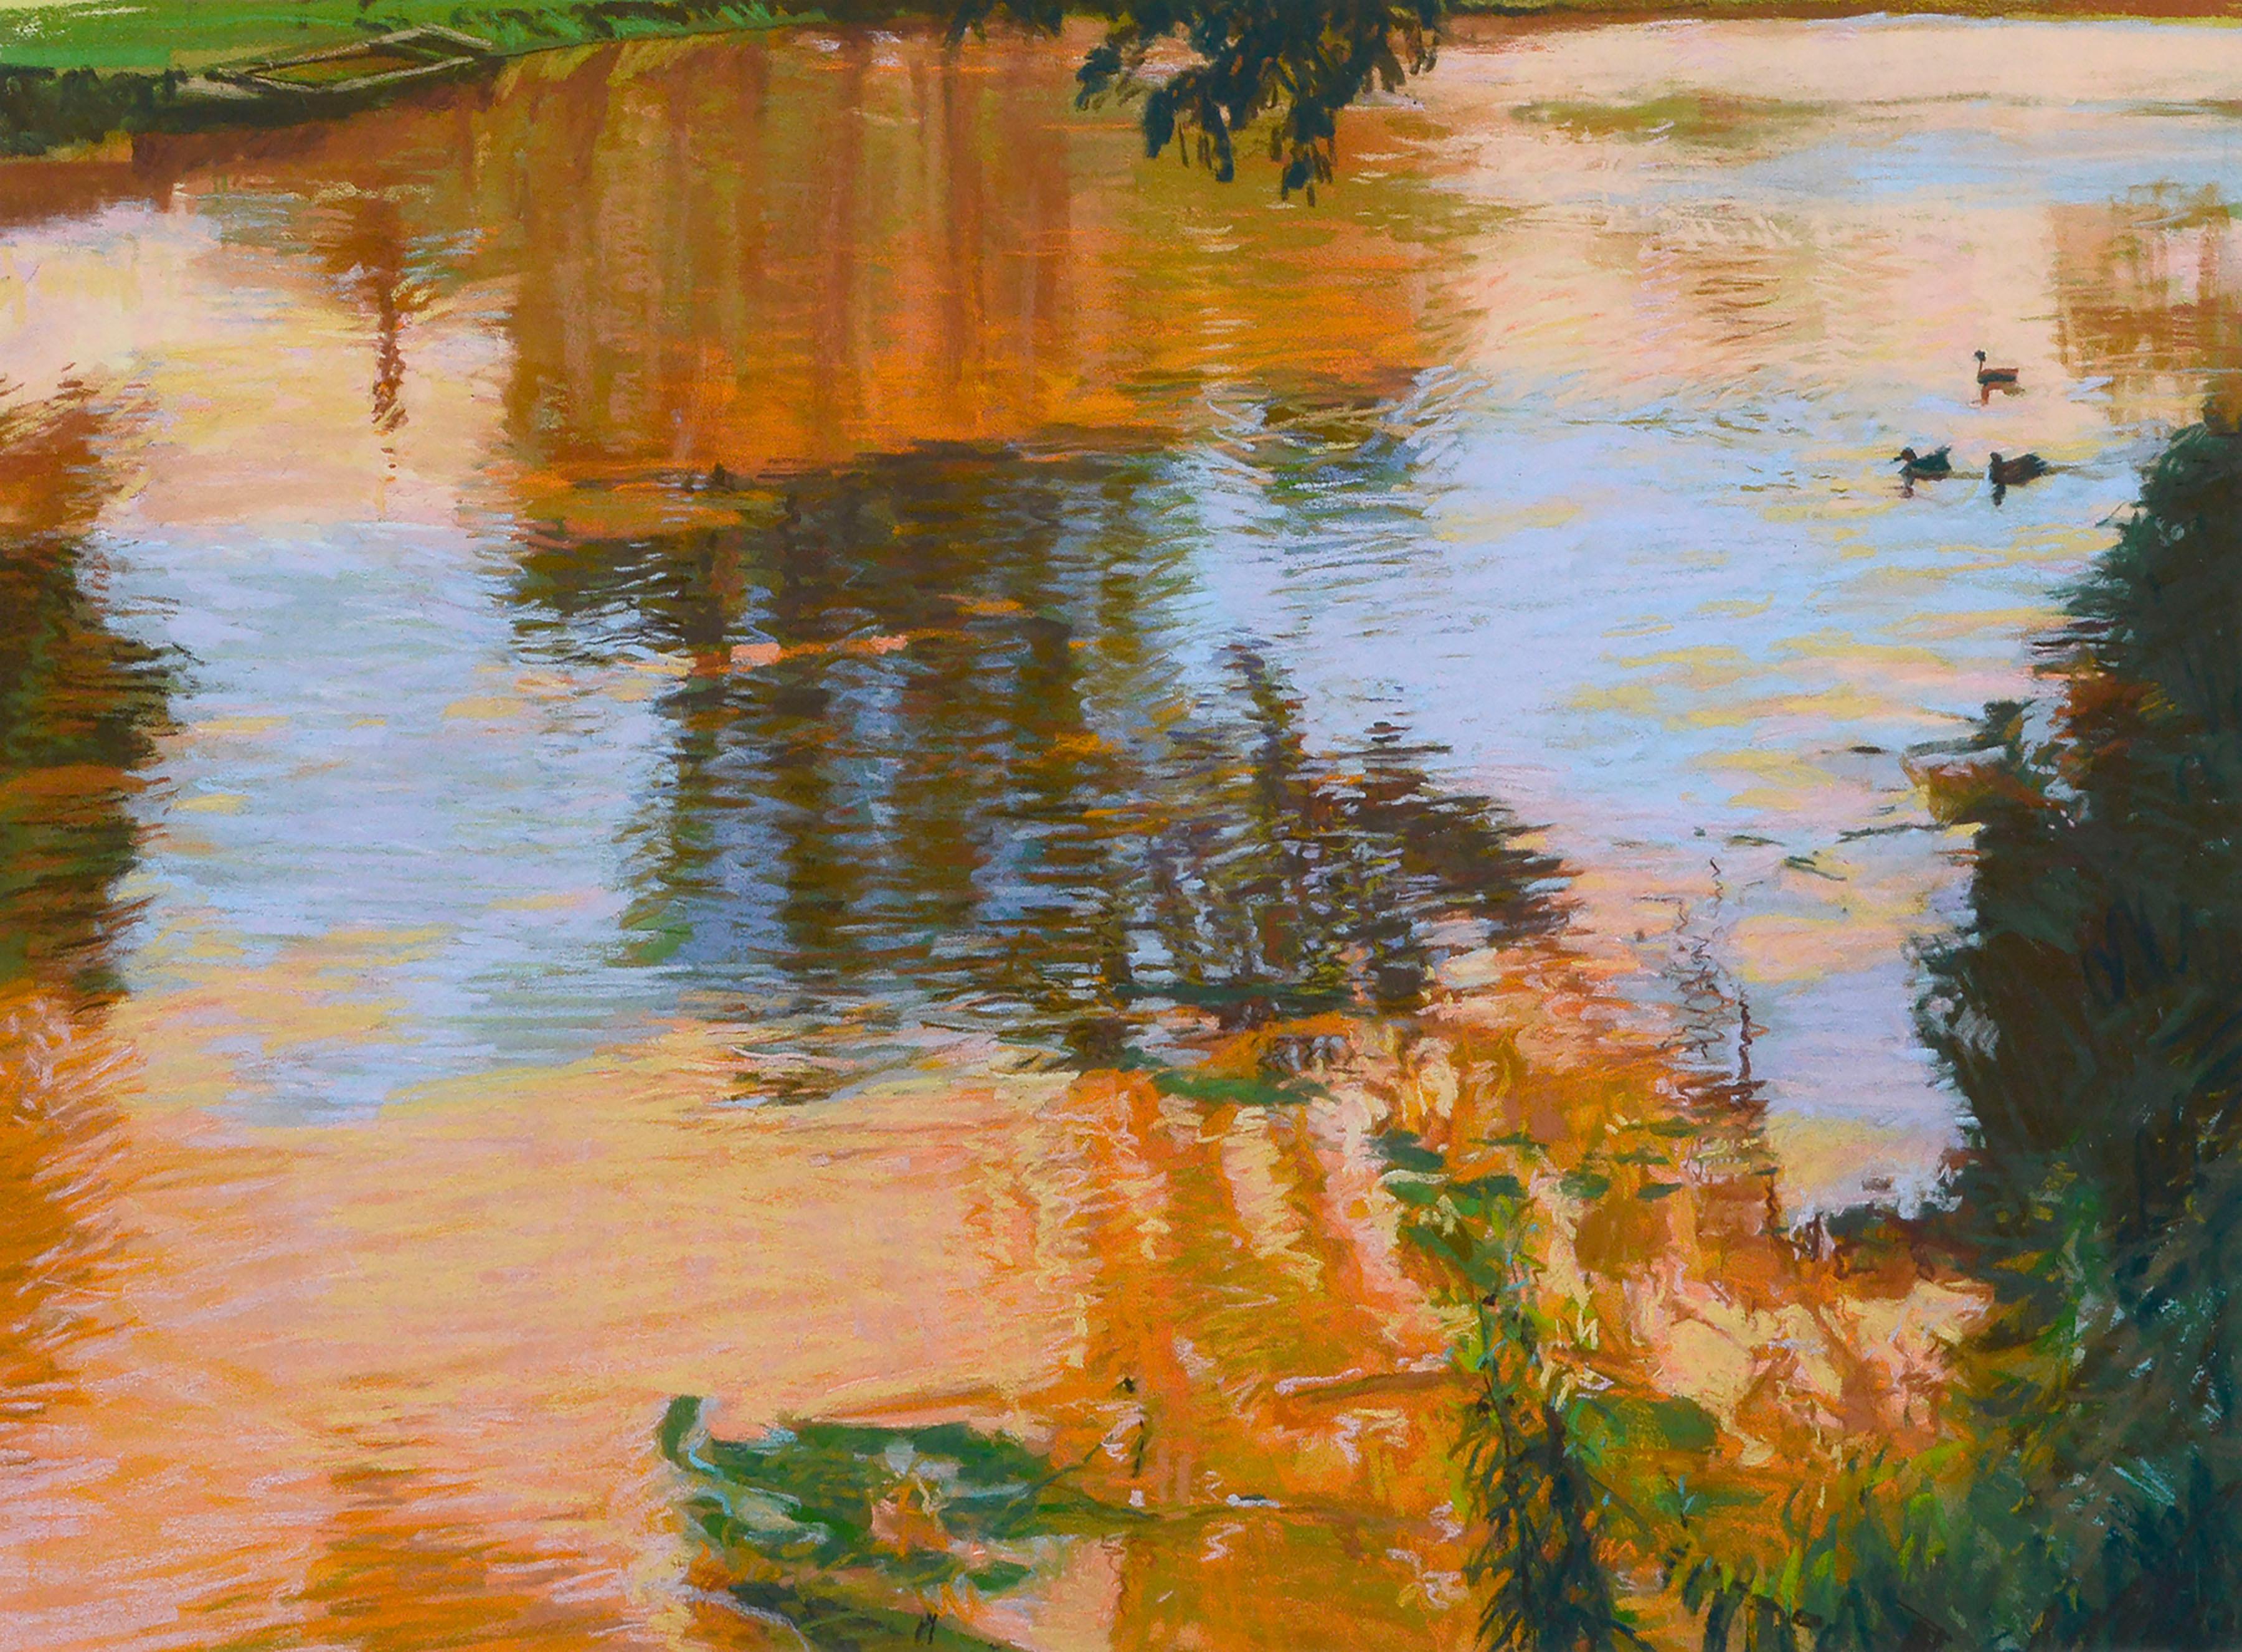 Colorful Lake Reflections, Large-Scale Pastel Landscape with Ducks - Art by Unknown